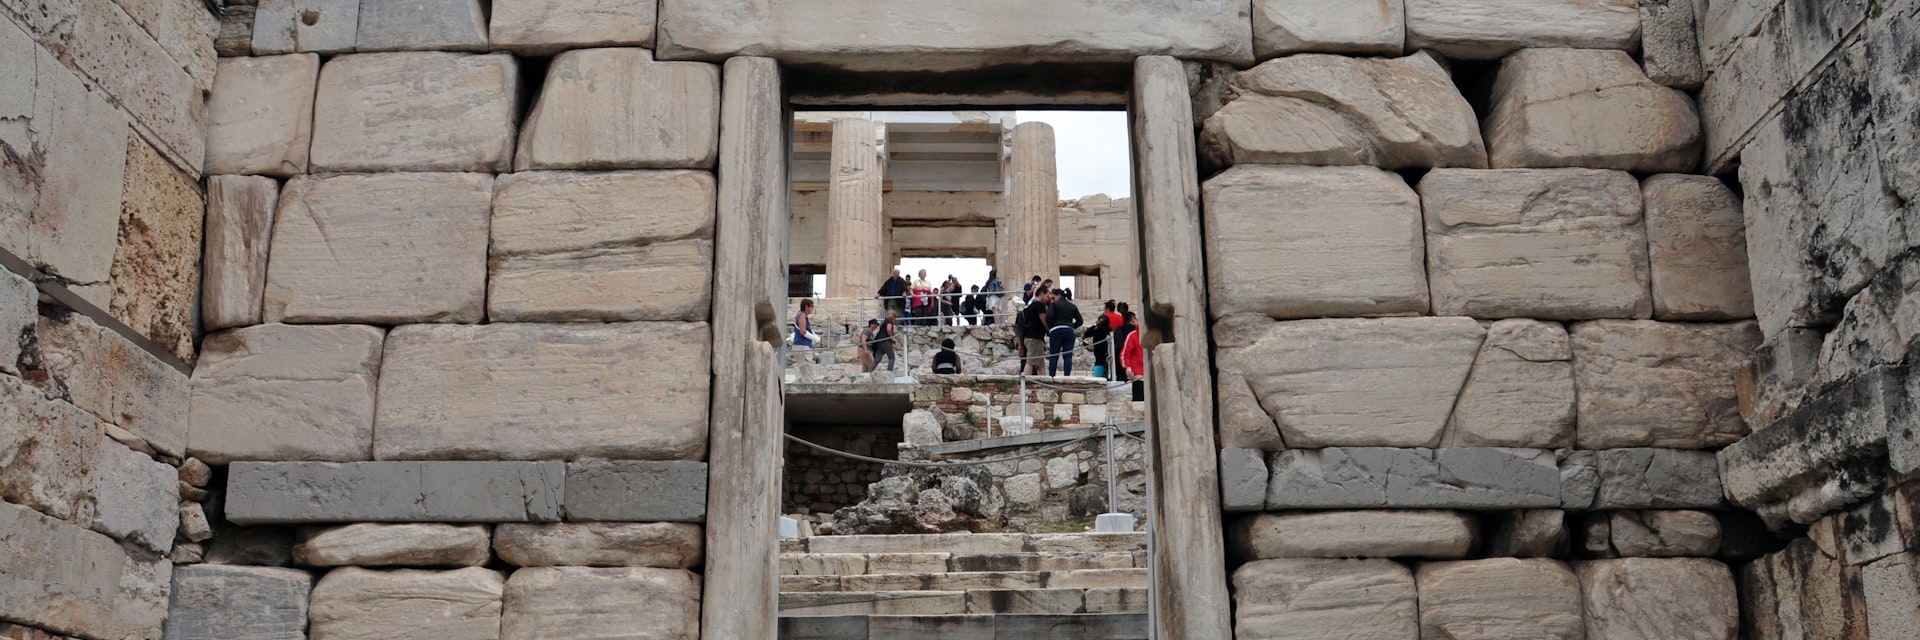 ATHENS, GREECE - MAY 6, 2014: Visitors at the Propylaia and the Beule Gate west entrance to the Acropolis of Athens, Greece.; Shutterstock ID 206520655; your: Erin Lenczycki; gl: 65050; netsuite: Digital; full: POI
206520655